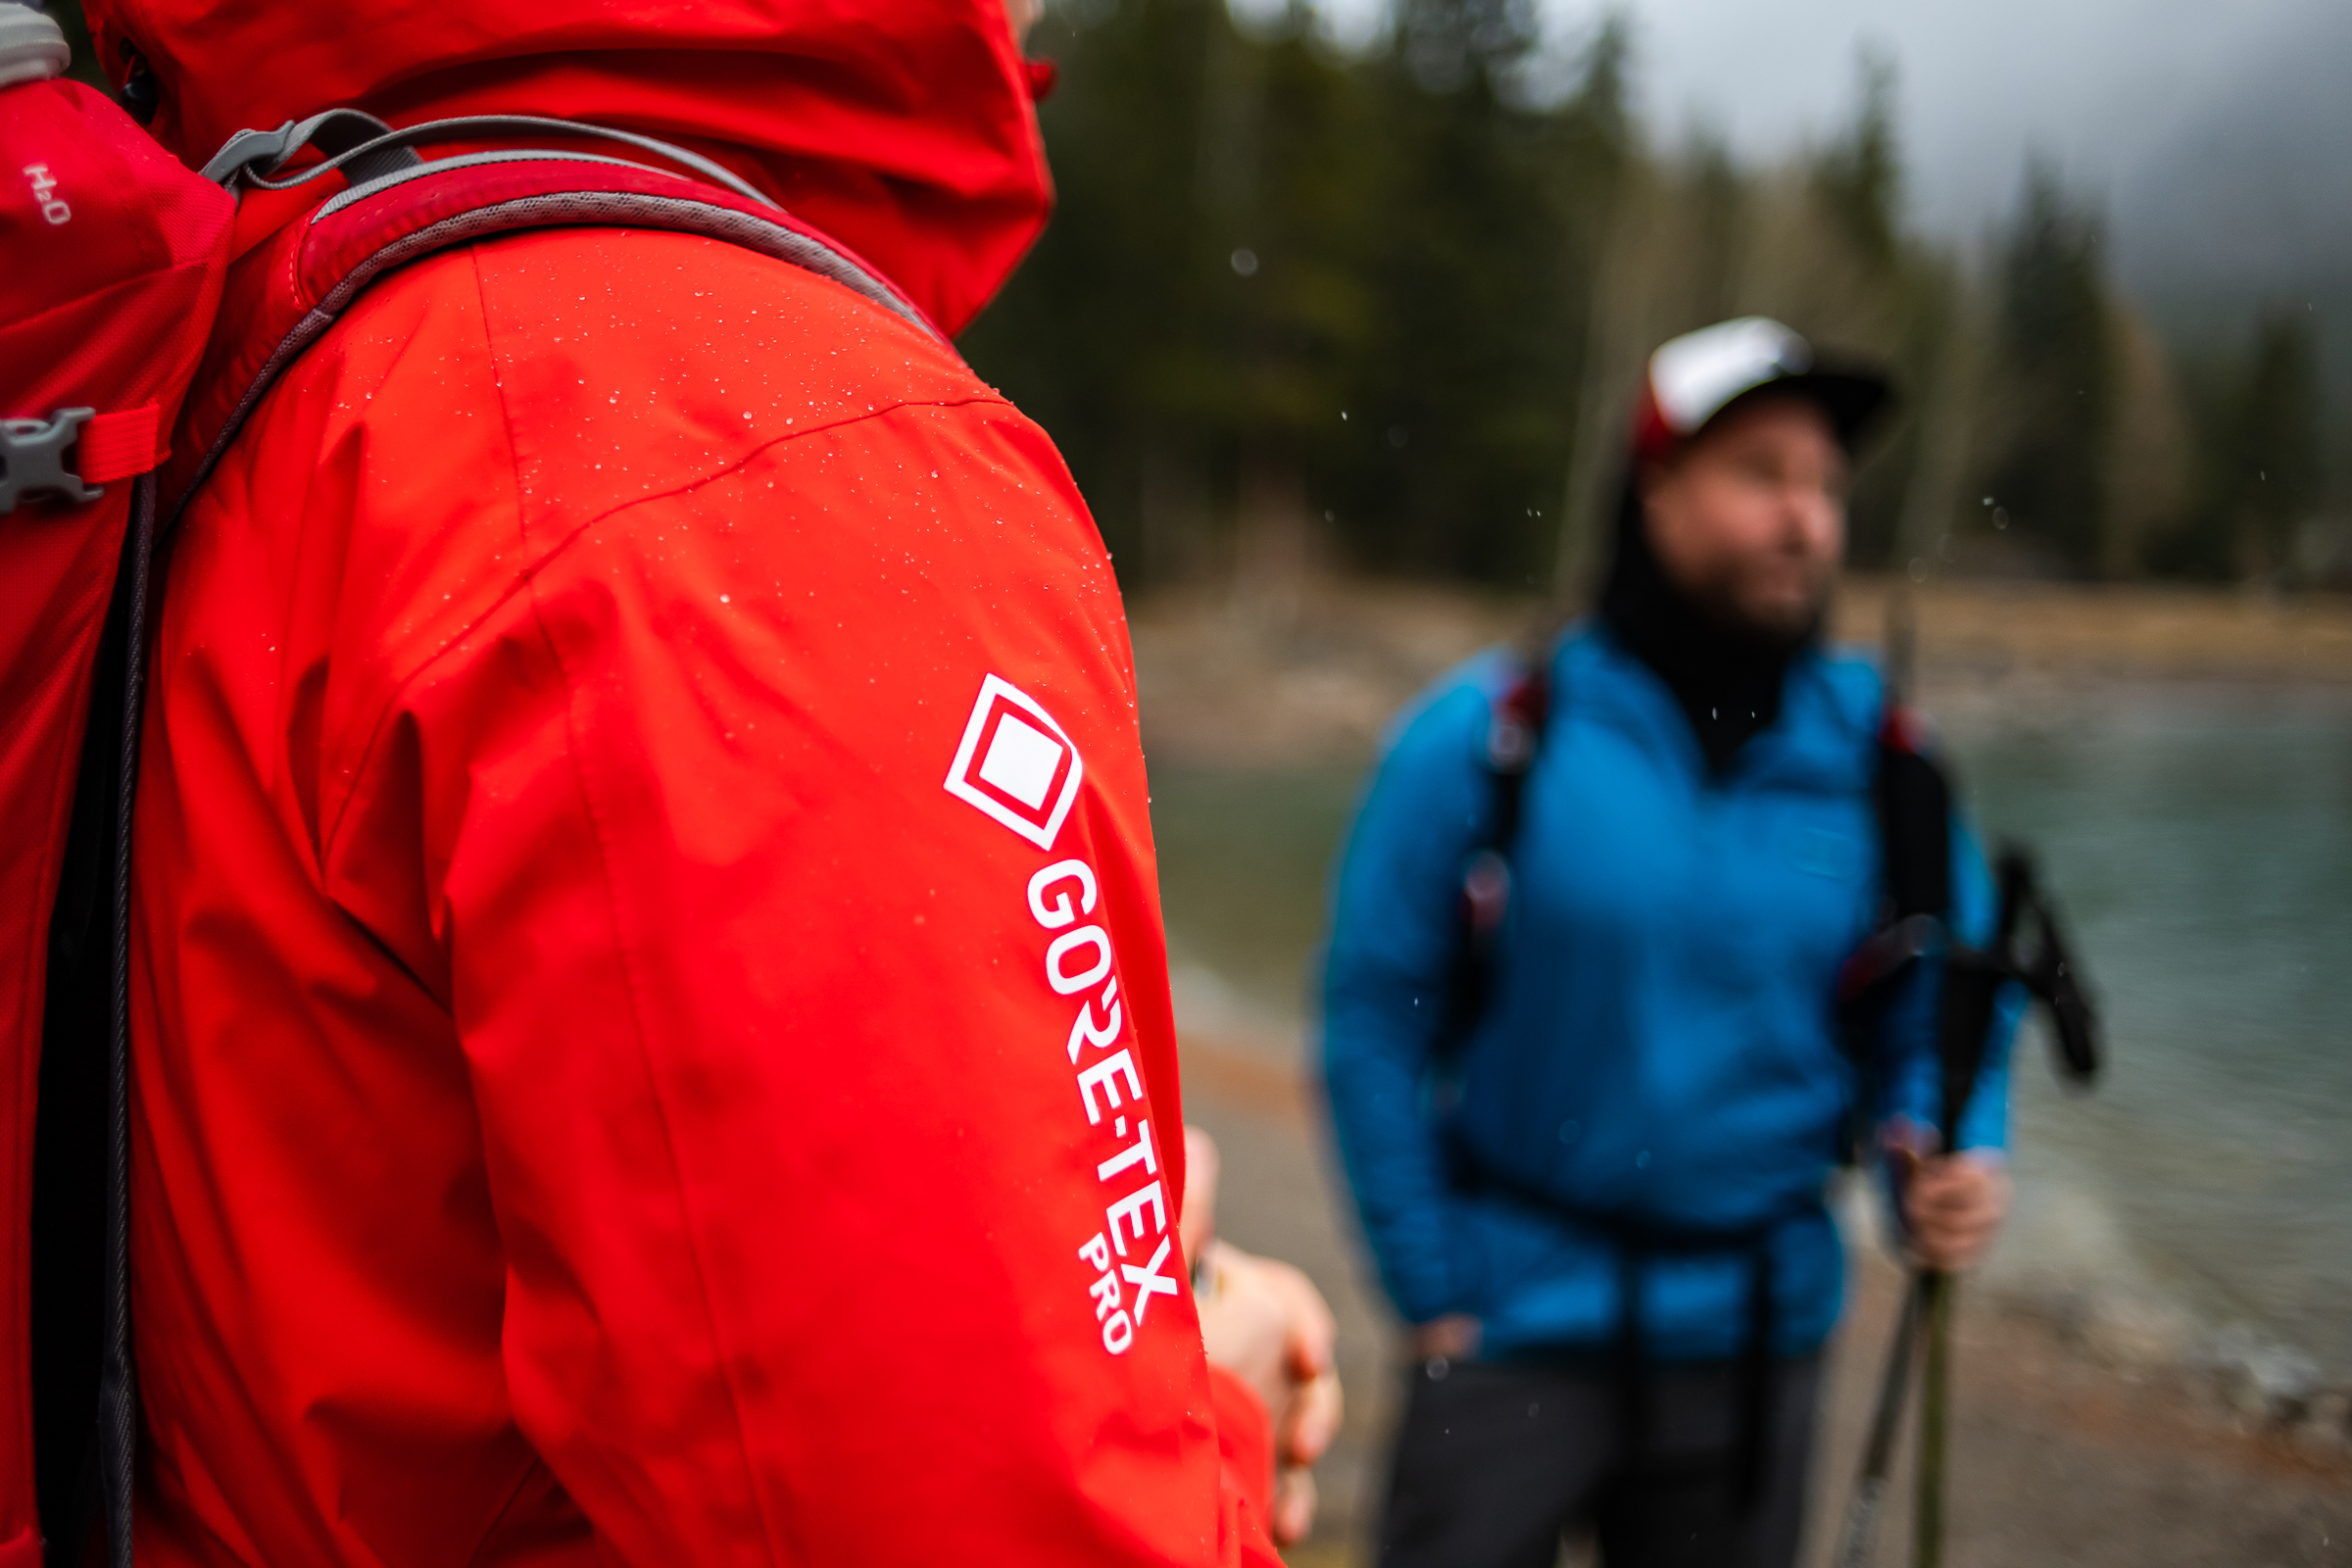 The New Gore-Tex Pro 3: New fabric technologies, but are they